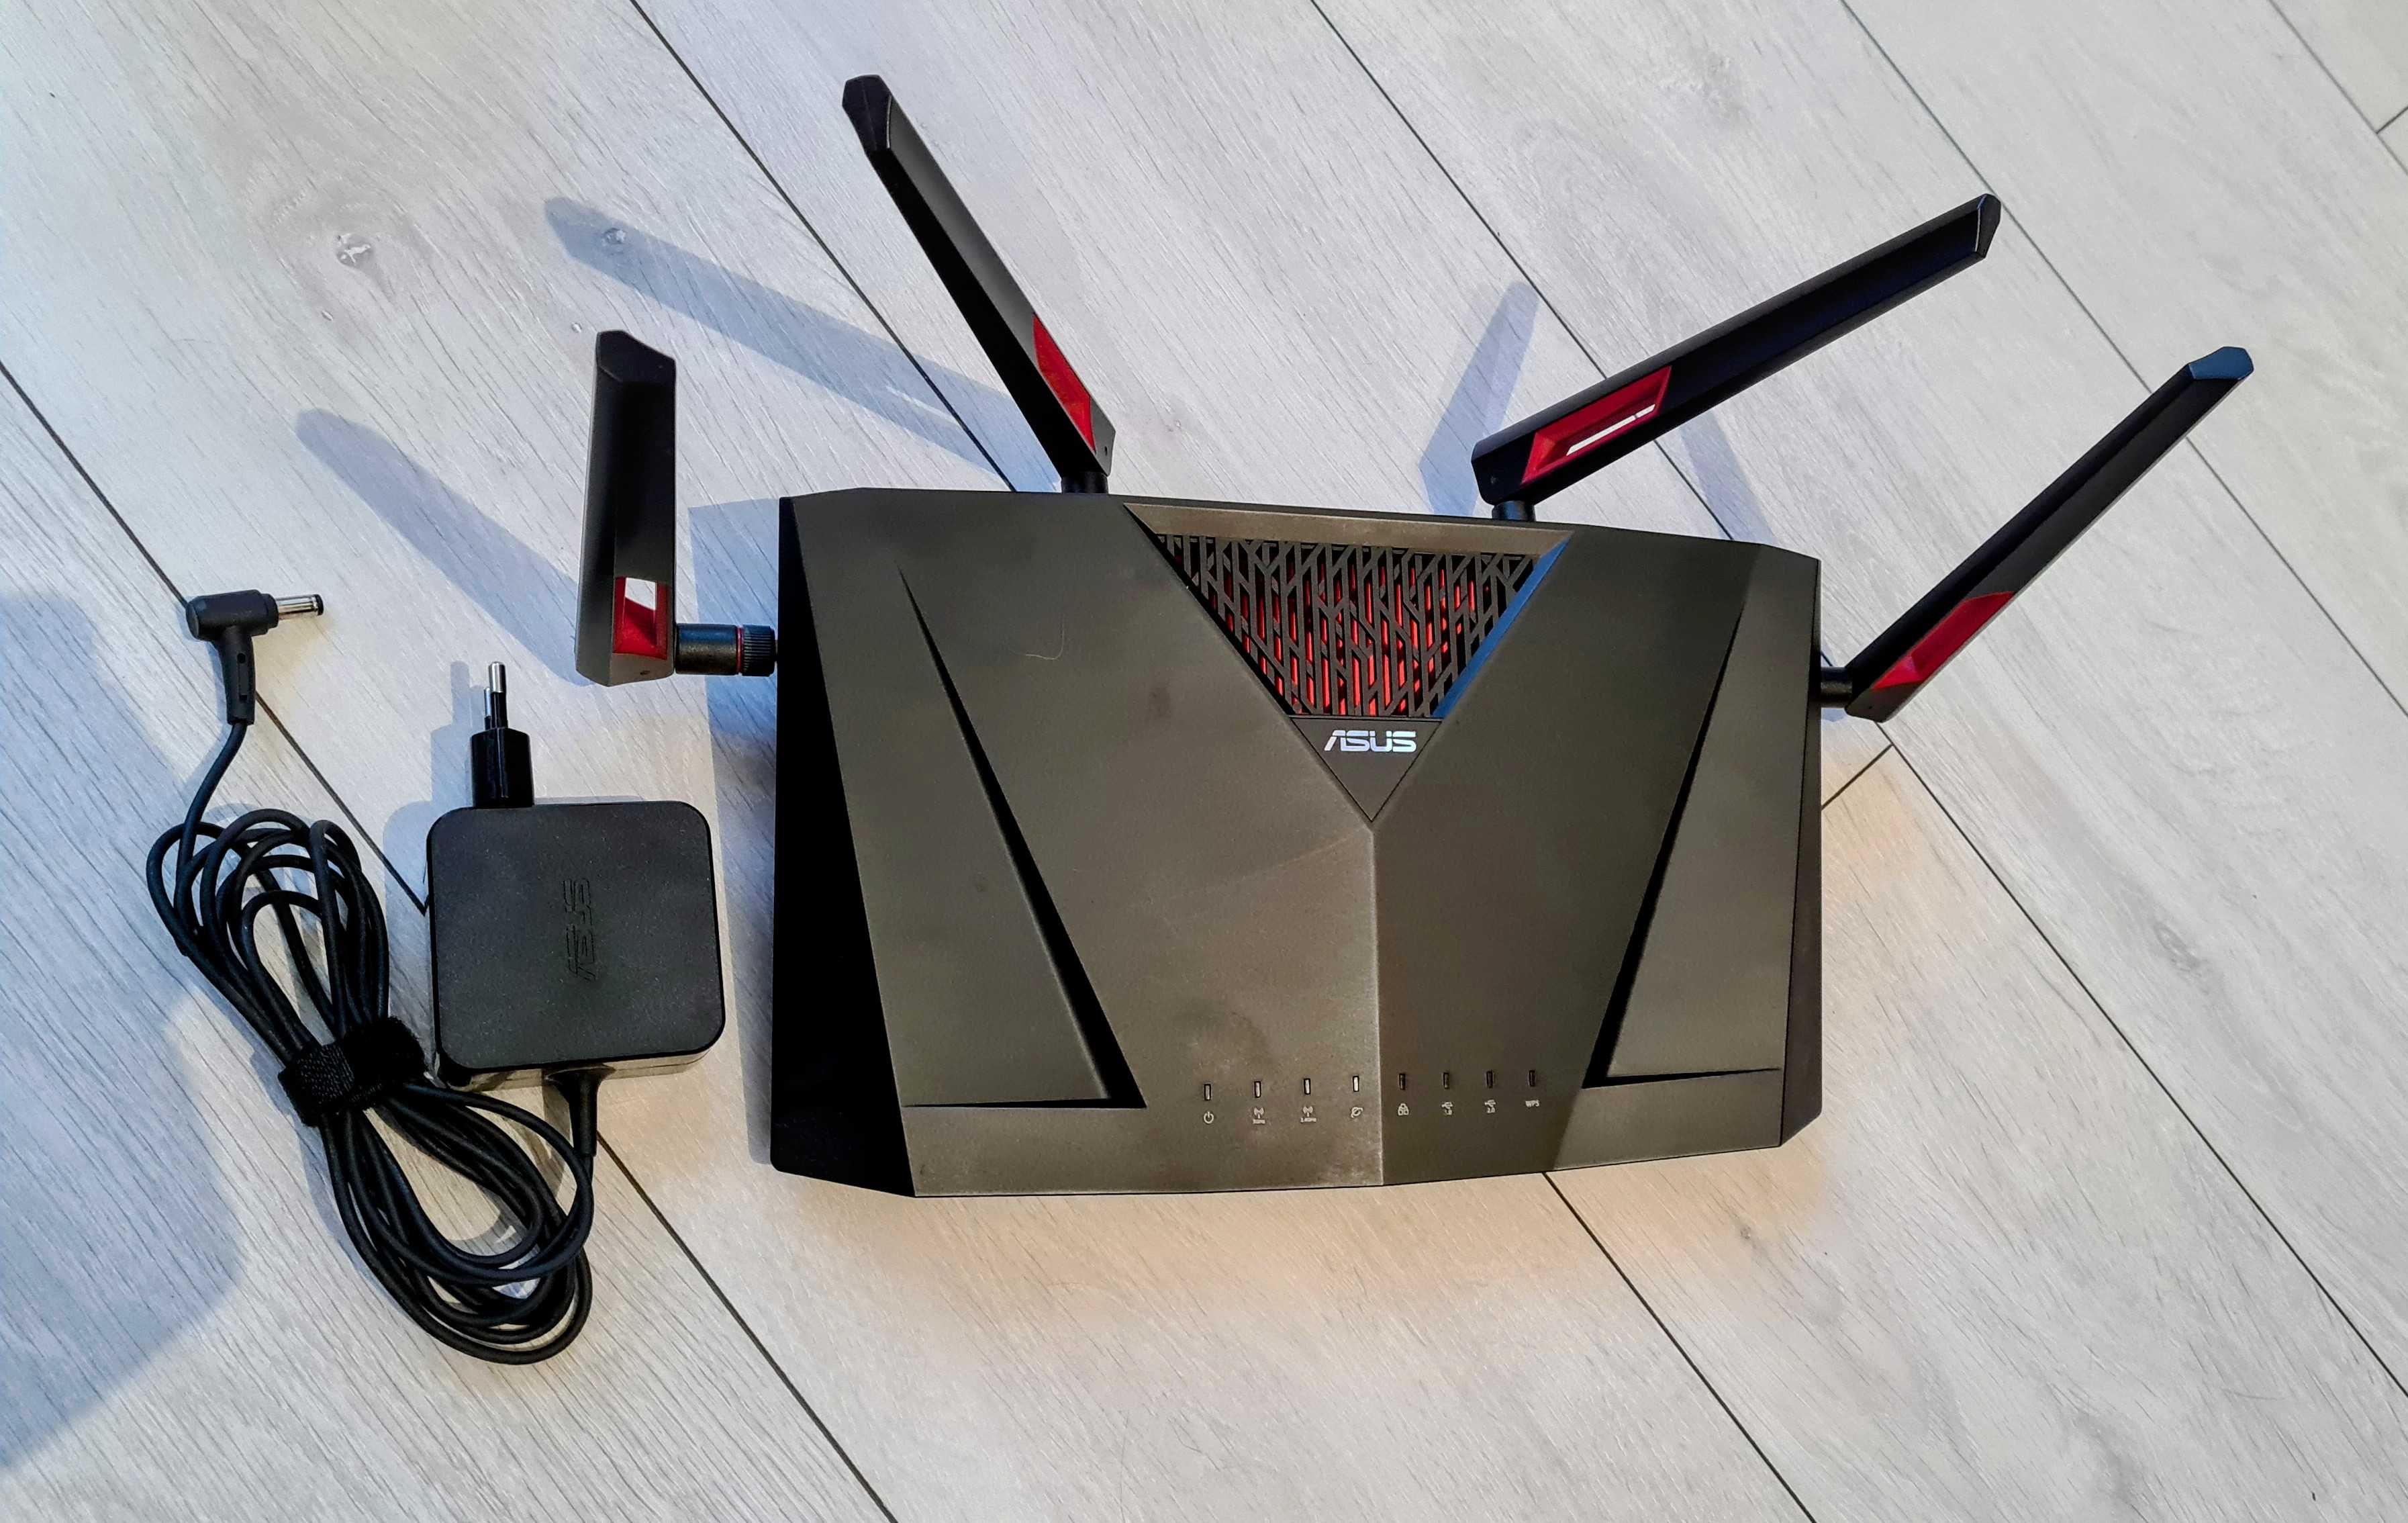 Router wireless ASUS RT-AC88U